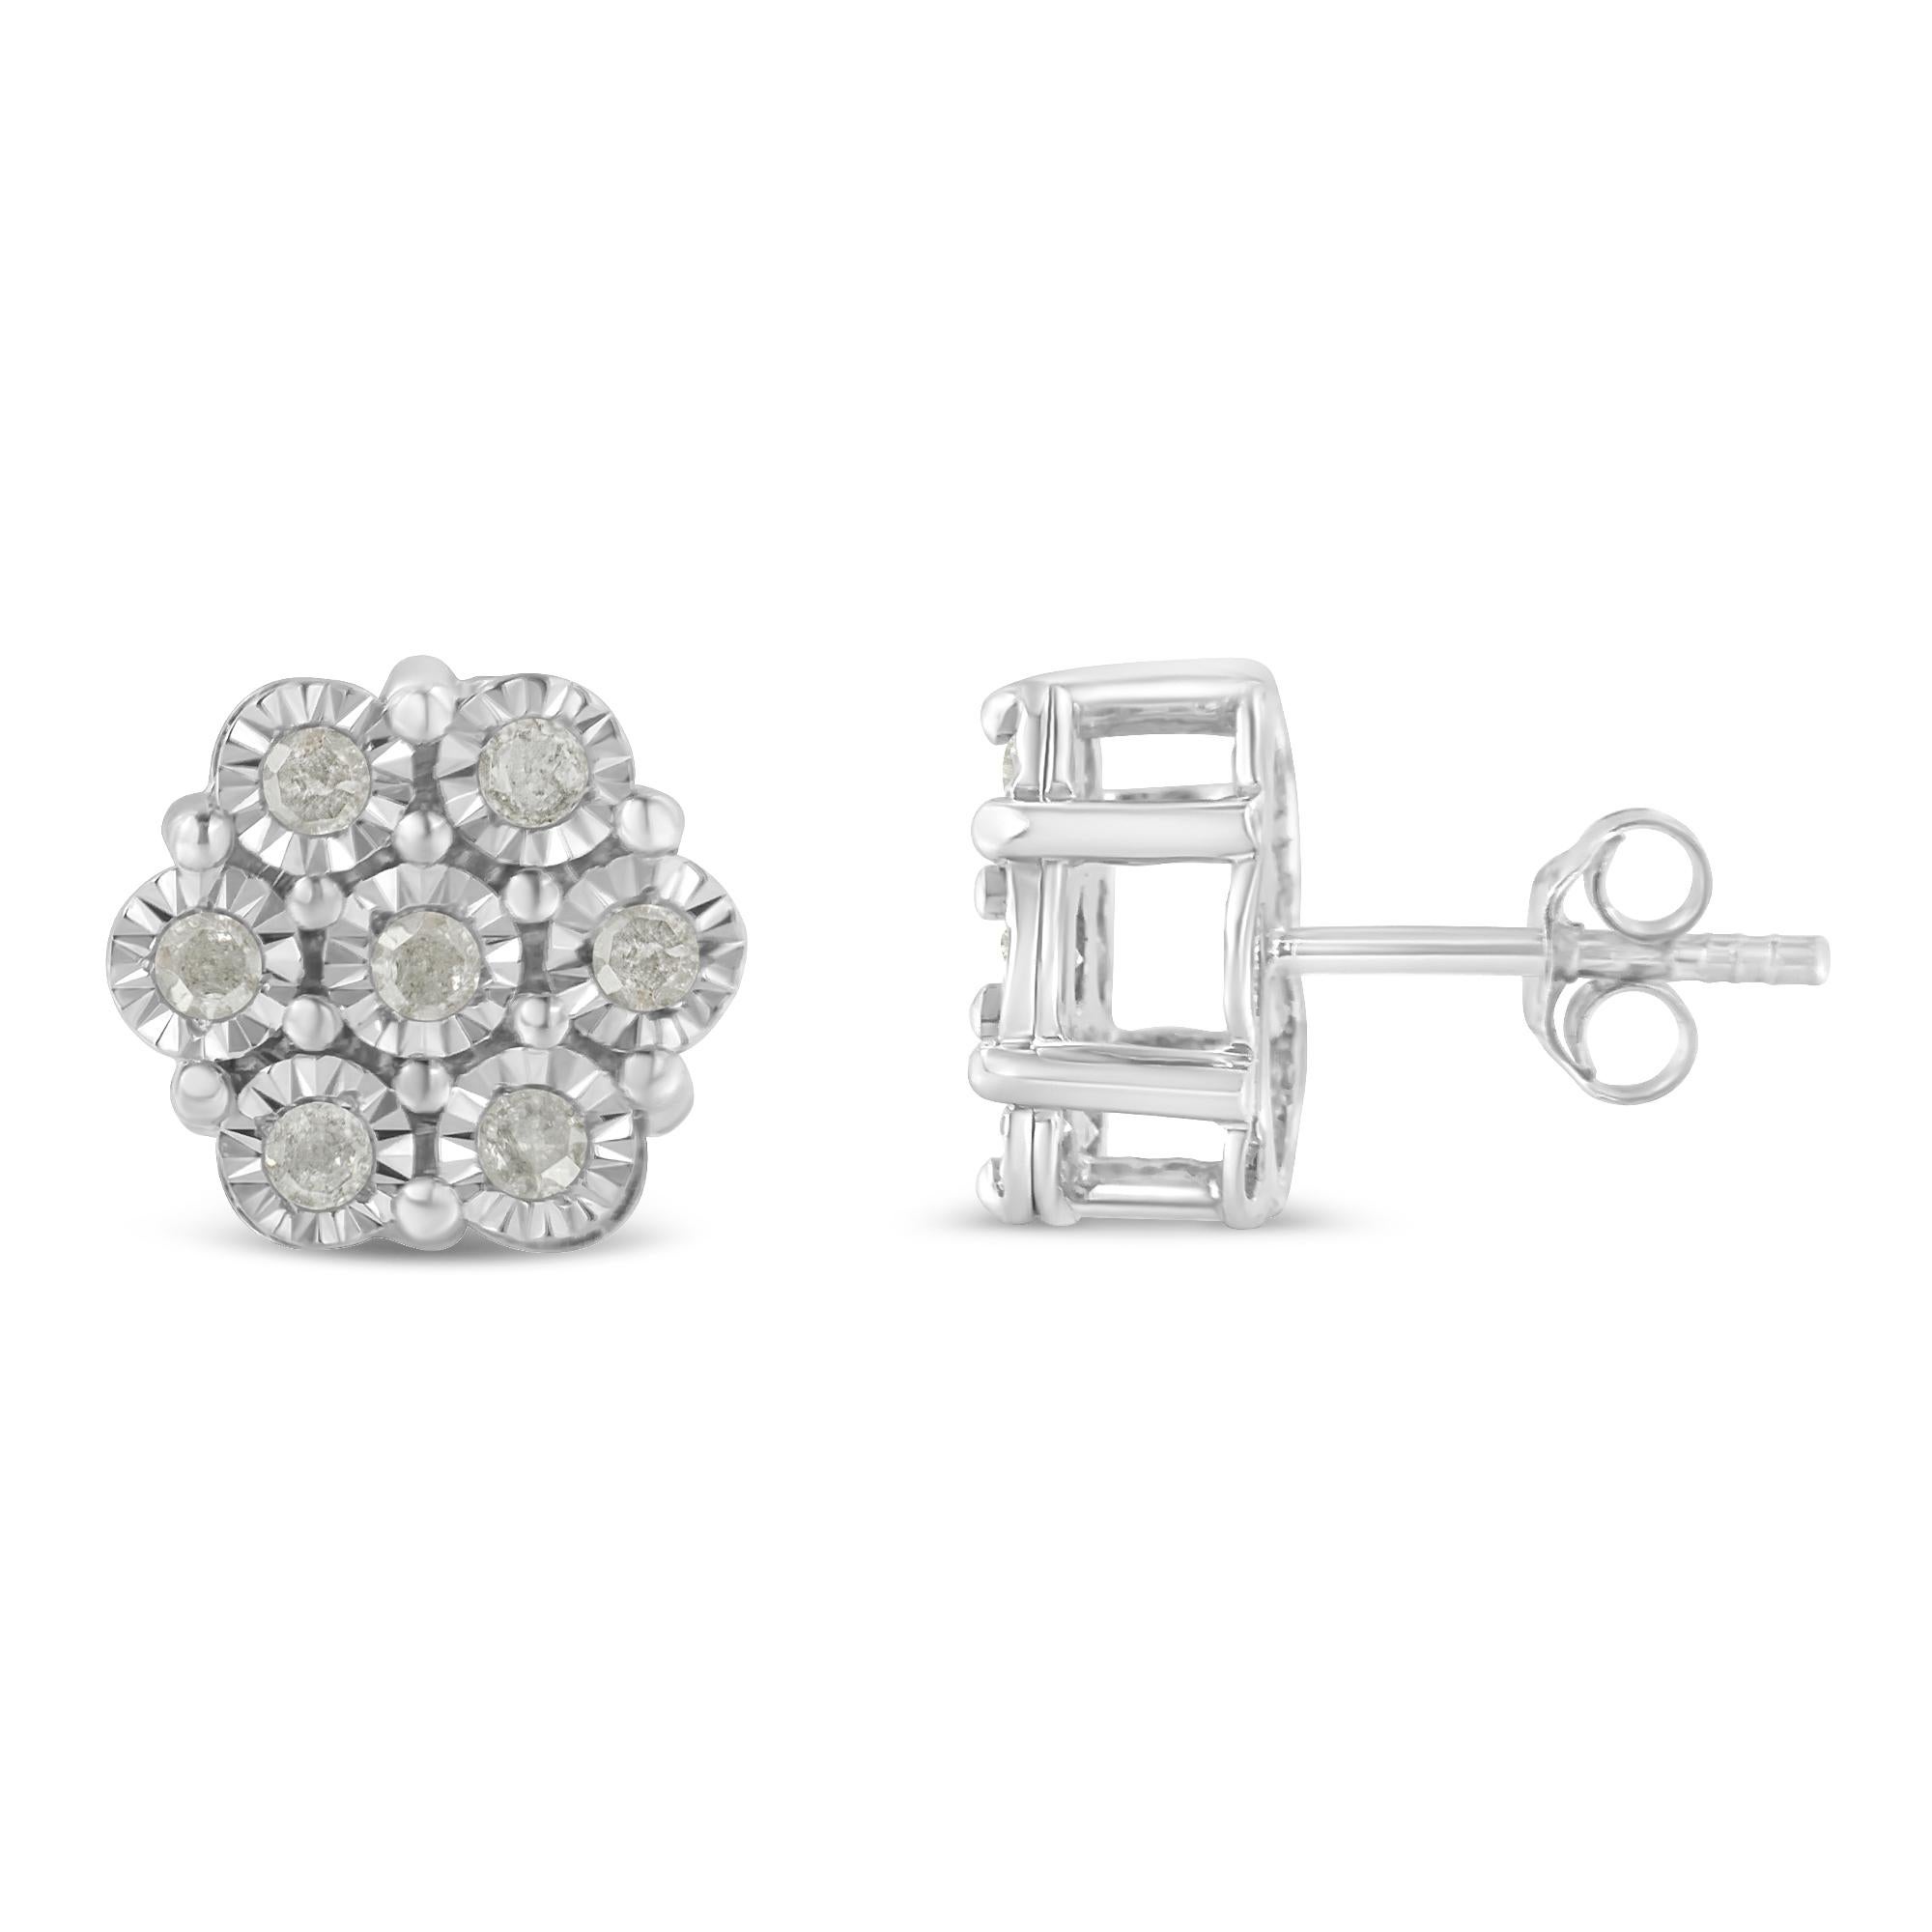 These flower stud earrings are embellished with diamonds in a miracle setting to make up a classic and elegant look. These beautiful stud earrings are made up of 14 rose-cut promo quality diamonds, which are the lowest on the diamond color and